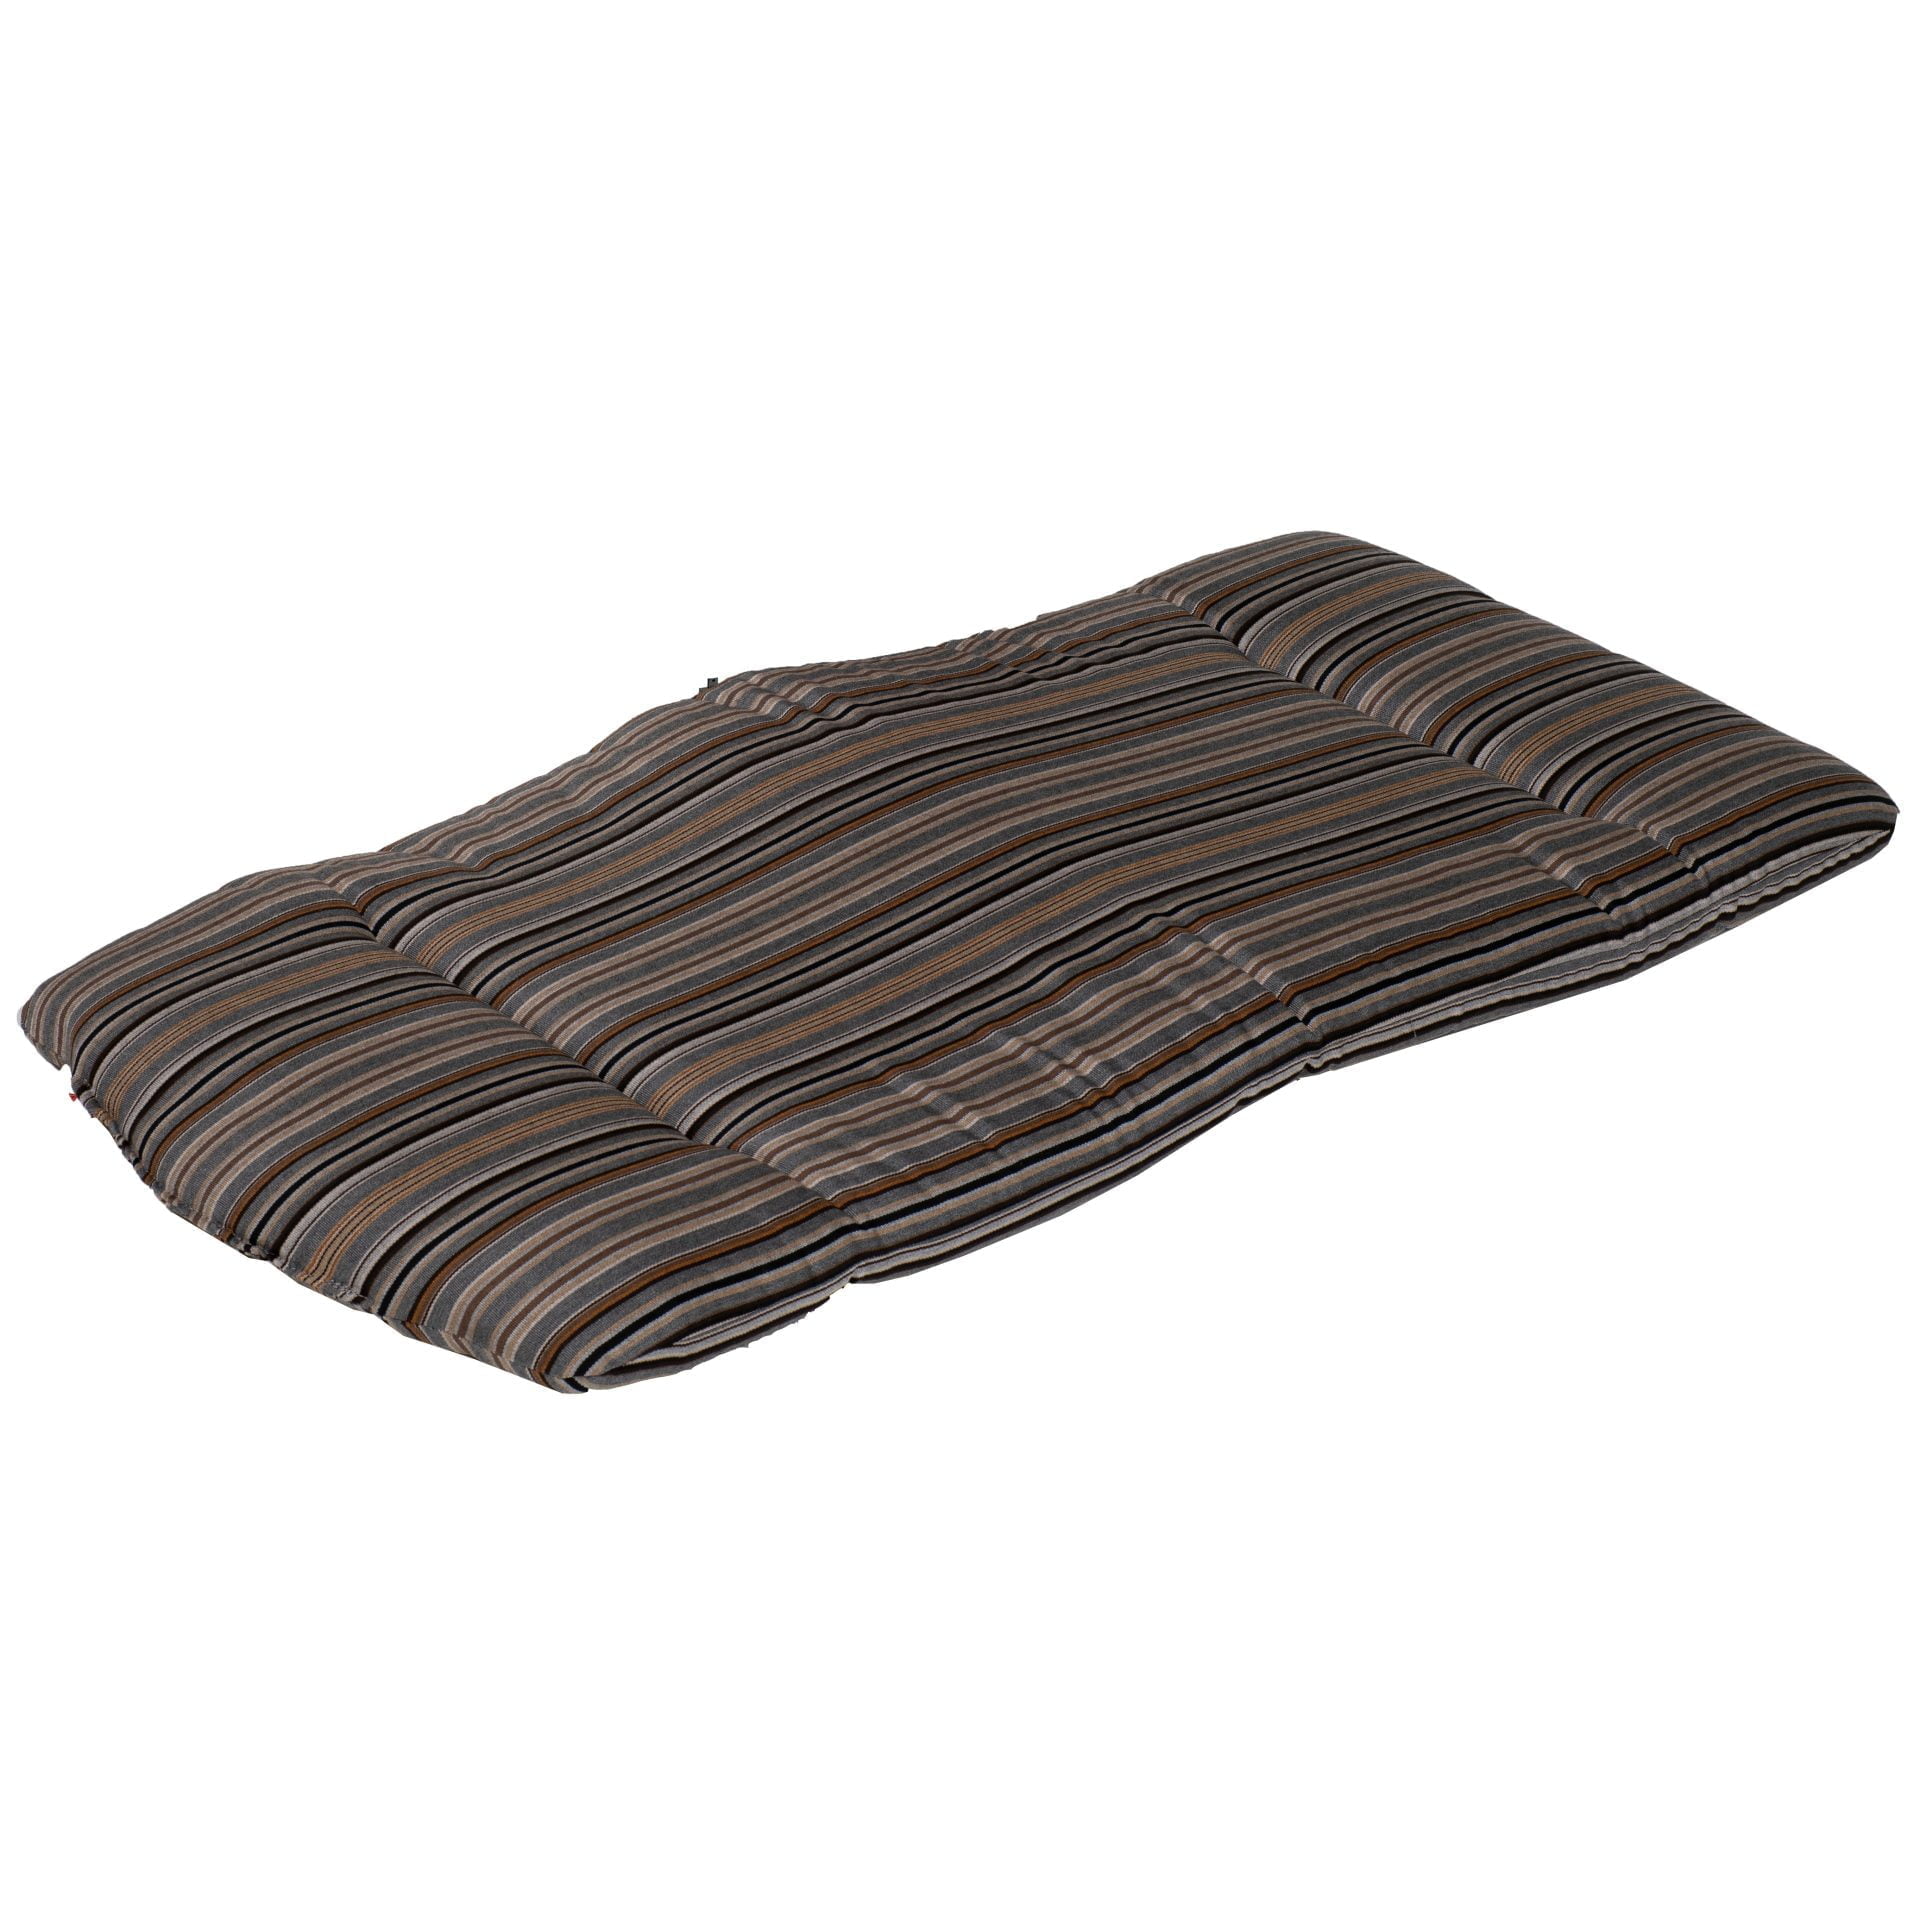 Comfo-Back Chaise Lounge Seat Cushion